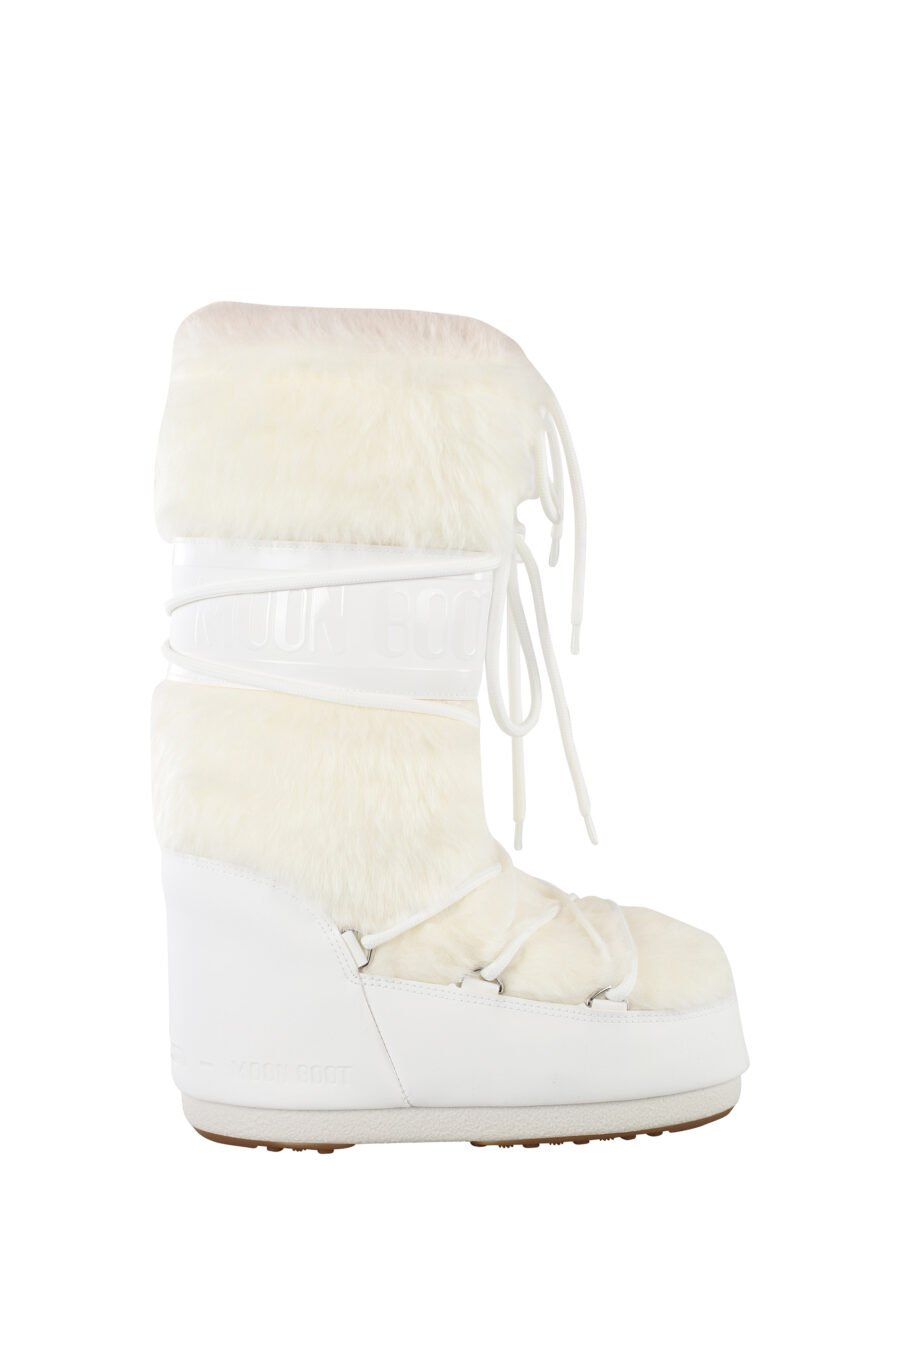 White snow boots with monochrome logo - IMG 6805